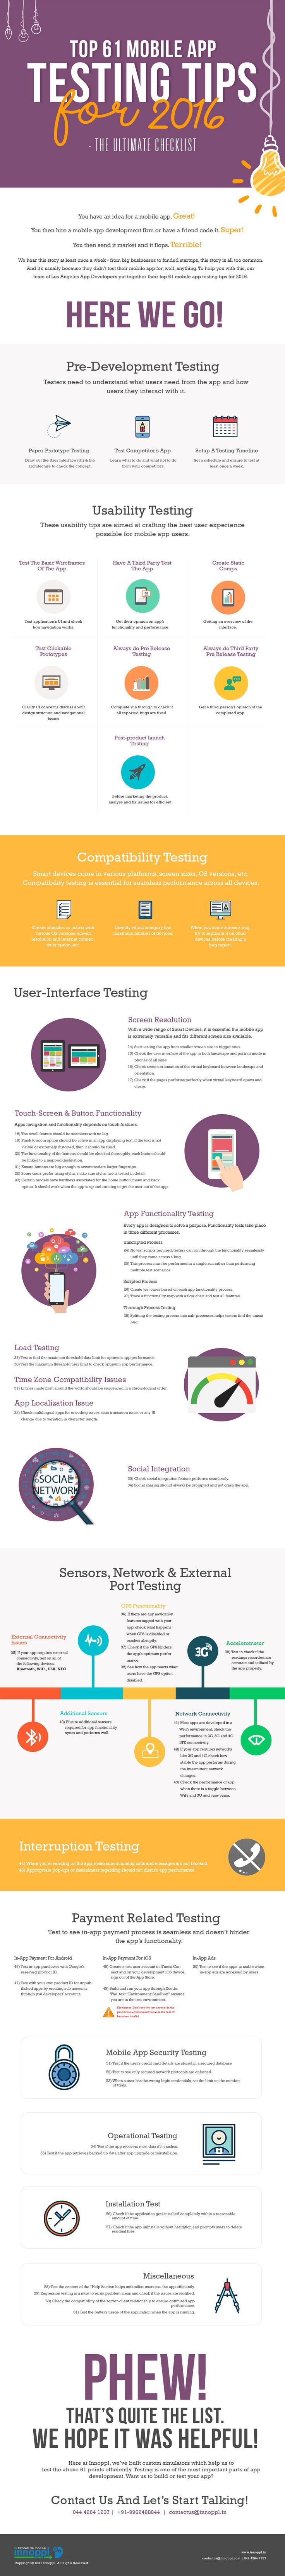 Top 61 Mobile App Testing Tips for 2016. If you're a user experience profess...